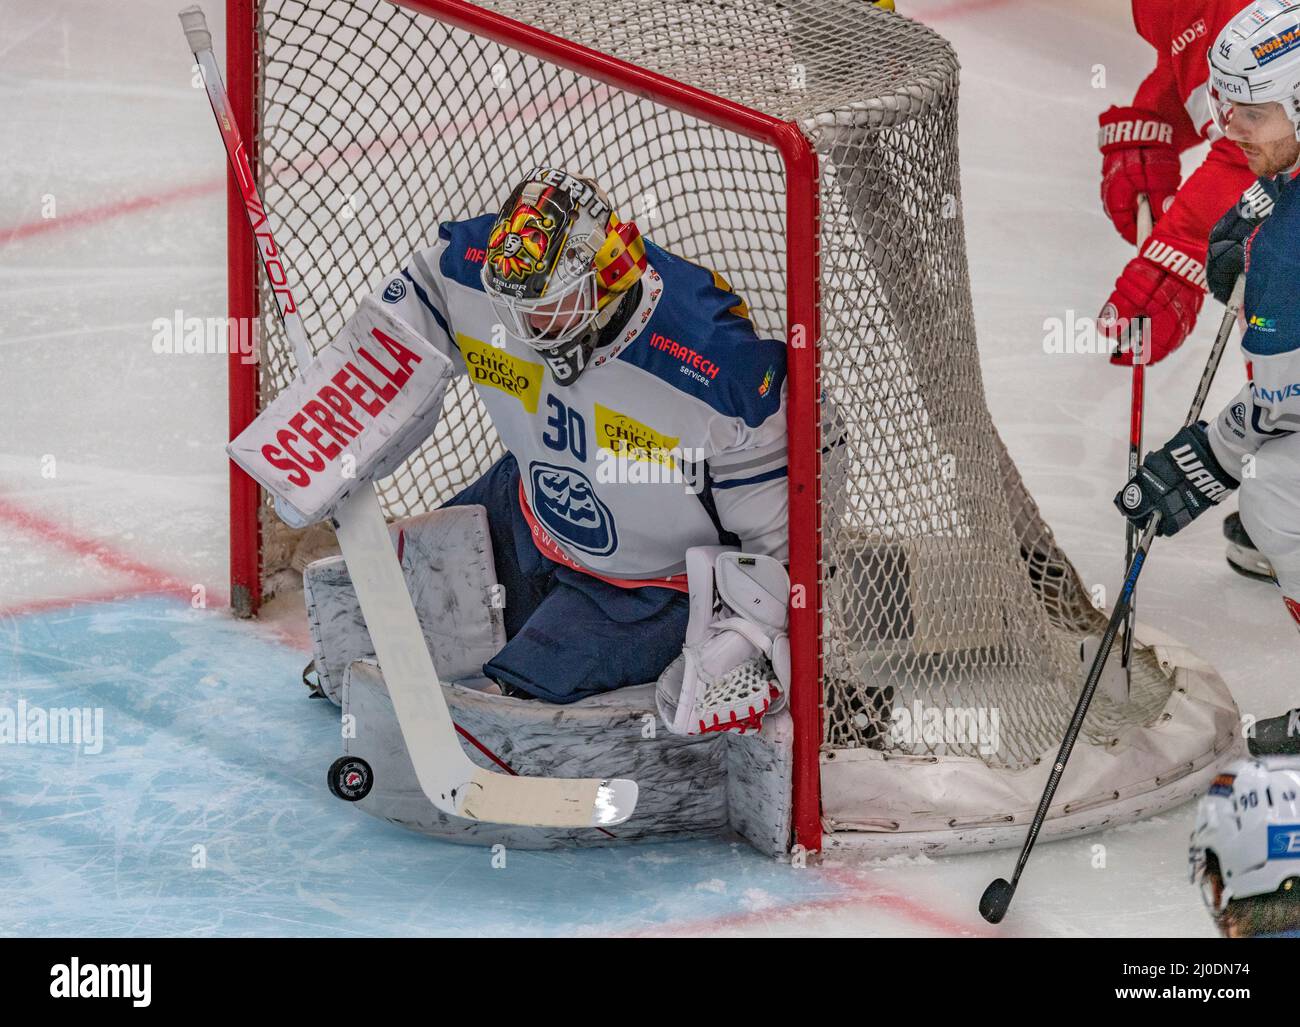 Lausanne, Vaudoise Arena, Switzerland. 18th Mar, 2022: Janne Juvonen (goalkeeper) of HC Ambri-Piotta (30) is in action during the Pre-playoffs, Acte 1 of the 2021-2022 Swiss National League Season with the Lausanne HC and HC Ambri-Piotta. Credit: Eric Dubost/Alamy Live News Stock Photo